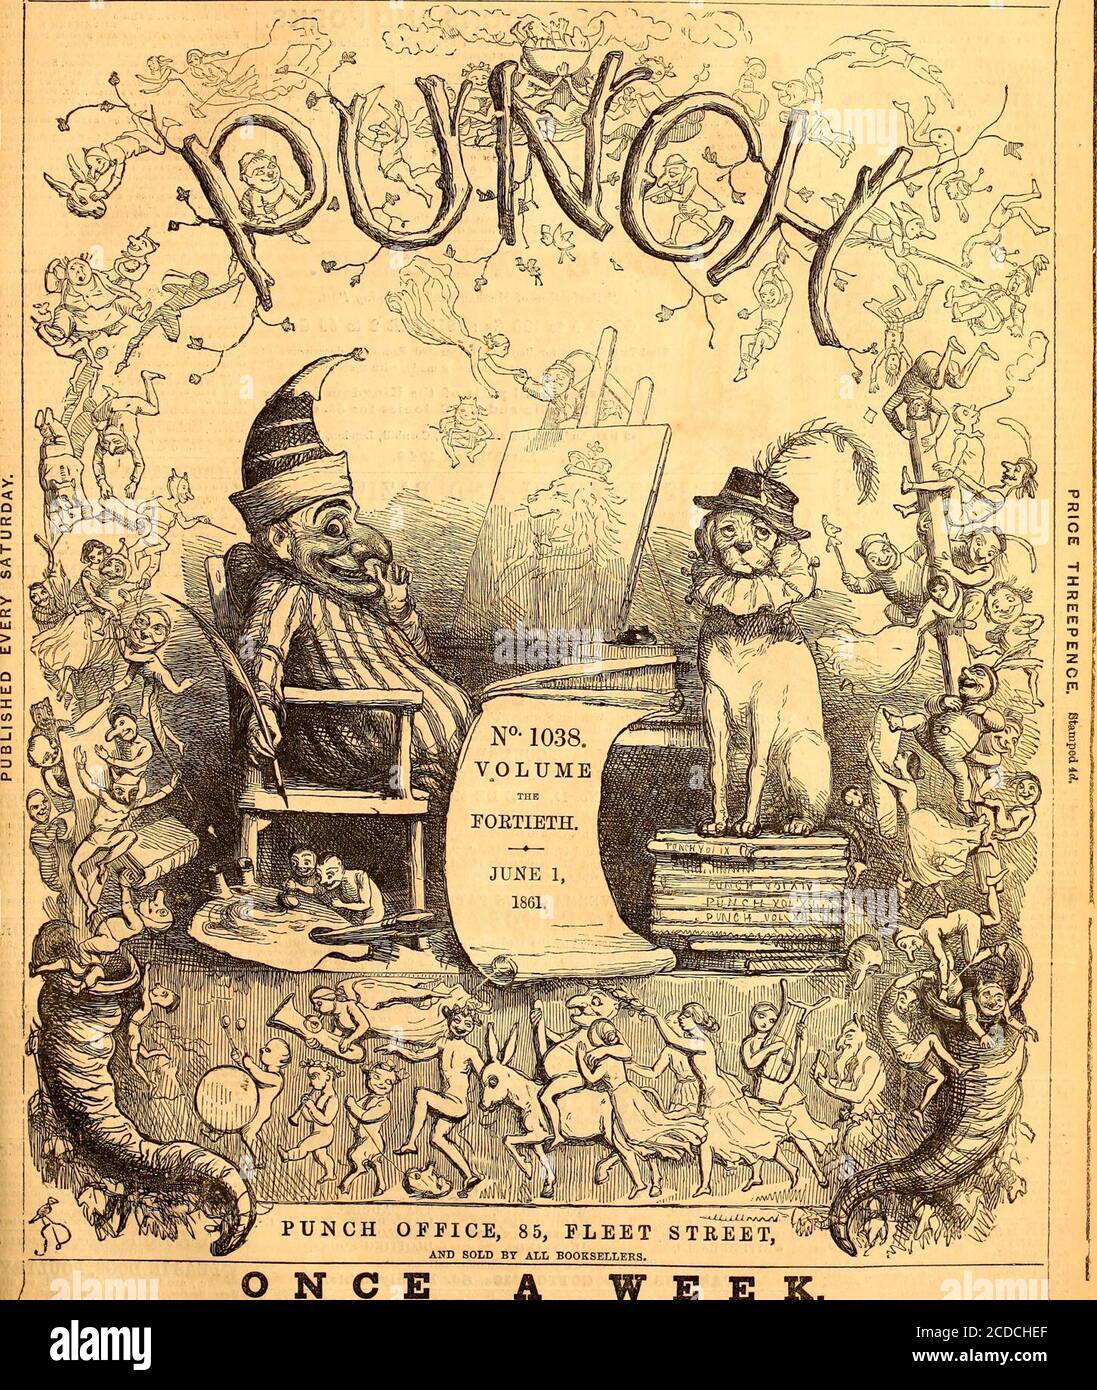 . Punch . THE RE-ISSUE OF PUNCH—Vol. IV. in Boards, Price 5s.is Published this day. Vols. I., II., and III., in Boards, and the Volumesfor 1841 and 1842, in Cloth, are now On Sale. BRADBURY AND EVANS, 11, BOUVERIE STREET, AND PUNCH OFFICE, 85, FLEET STREET, .C. ONCE E E No. CI., Published this day, Price 3d., contains THE SILVER CORD, BY SHIRLEY BROOKS. WITH1 ILLUSTRATIONS BY JOHN TENNIEL. LARGER THAN LIFE. With an Illustration VOLUNTEER DRILL.-AN ADJUTANTS DIART.-III. JUNE. By Edwin Arnold. THE JEWEL-CASE. Illustratedtl£v wi^R JAMES TILLIE OF PENTILLIE. Illustrated by H. Gr. Hine. WRESTLING A Stock Photo